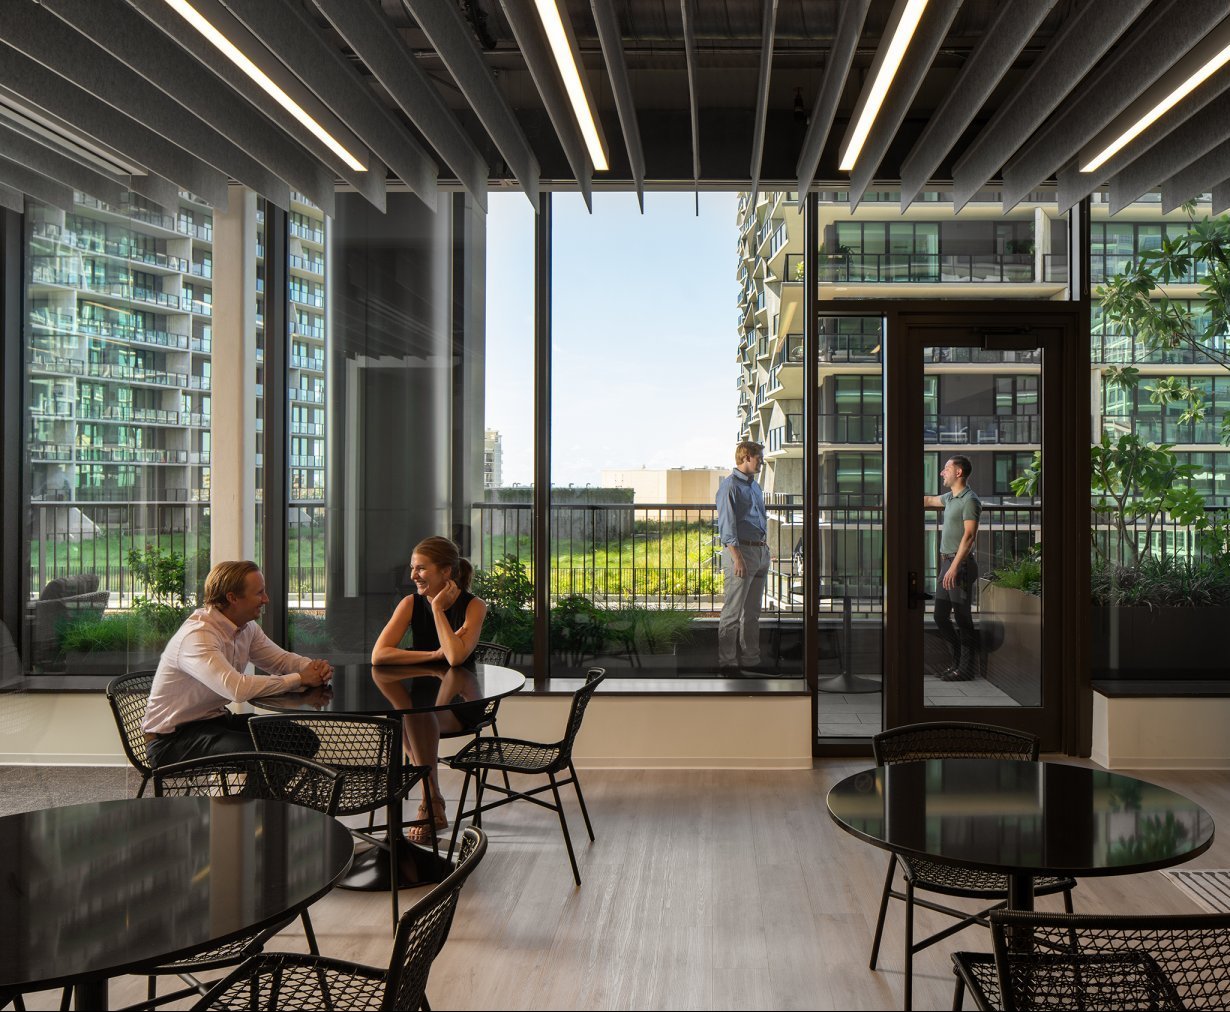 An office space at Thousand & One with floor to ceiling windows, outdoor terraces and open space for employee interactions